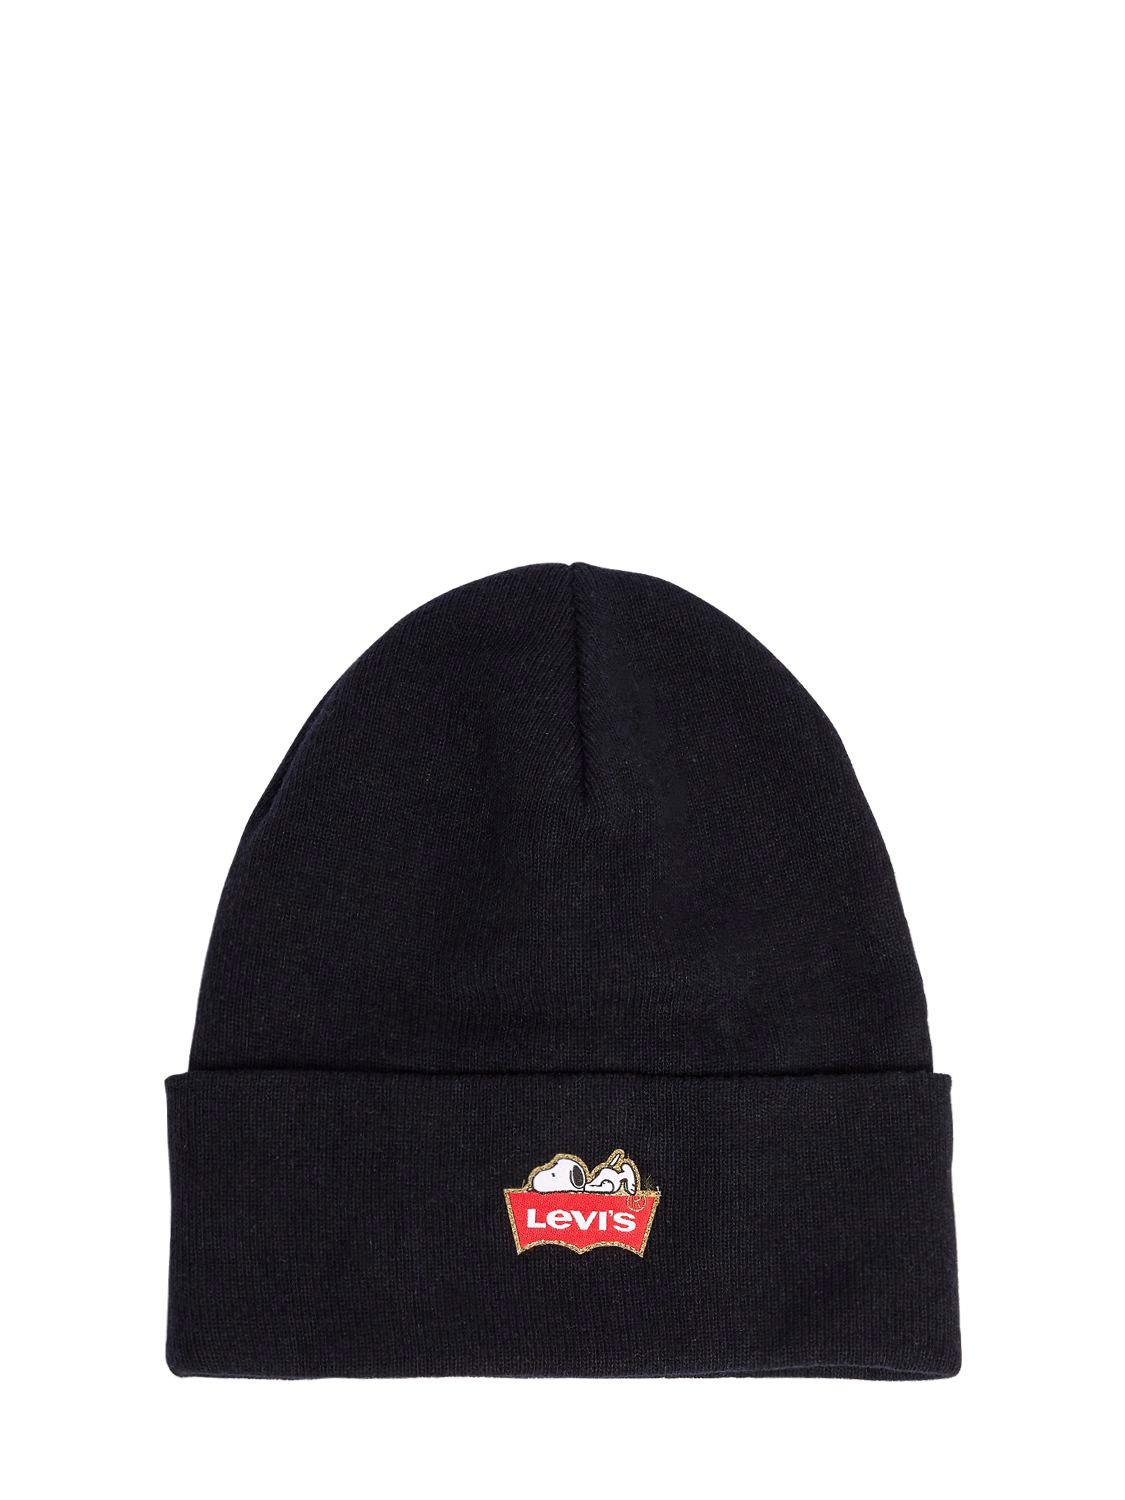 cappello levi's snoopy,New daily offers,imerhow.com